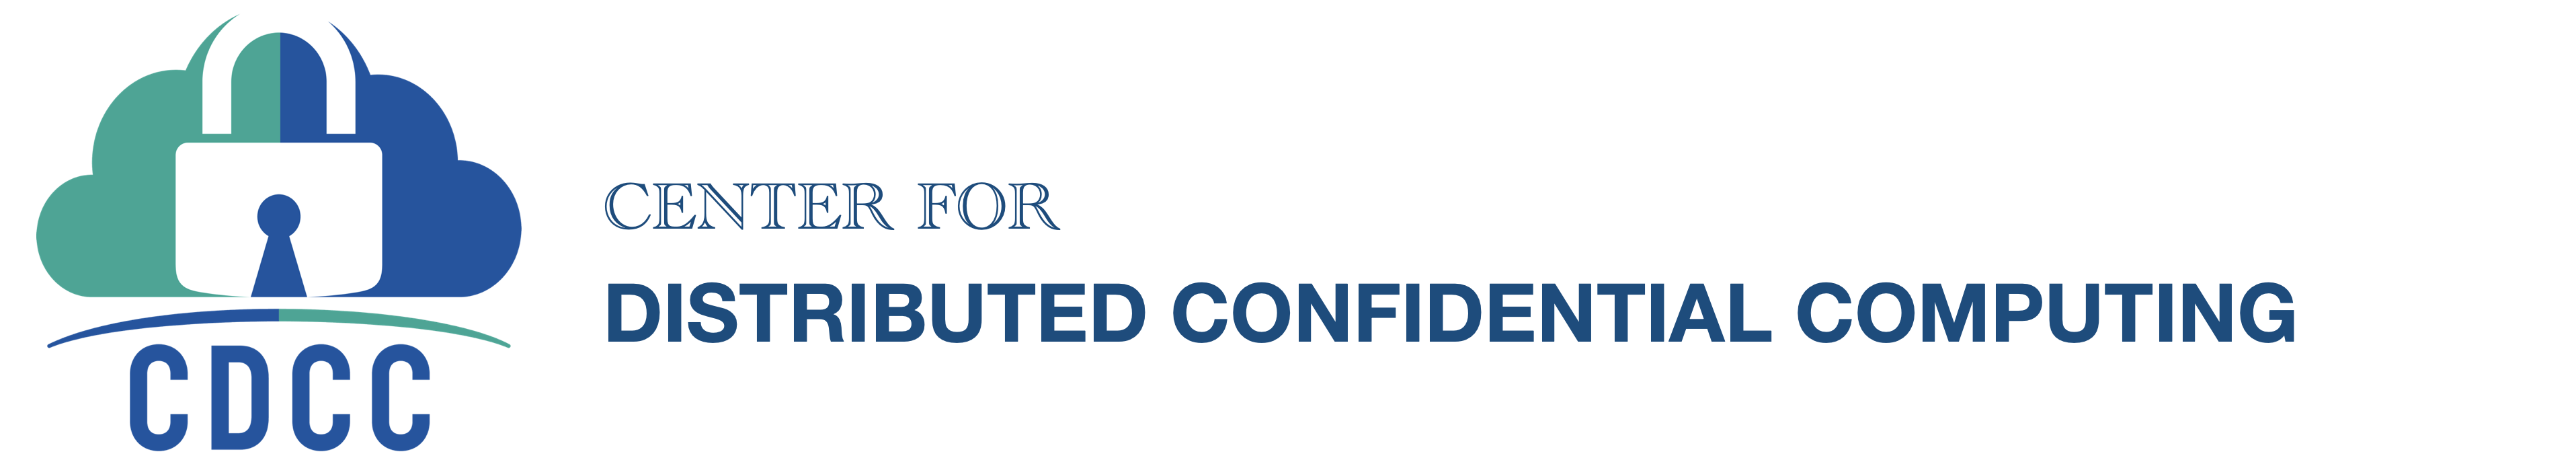 Center for Distributed Confidential Computing (CDCC) Logo